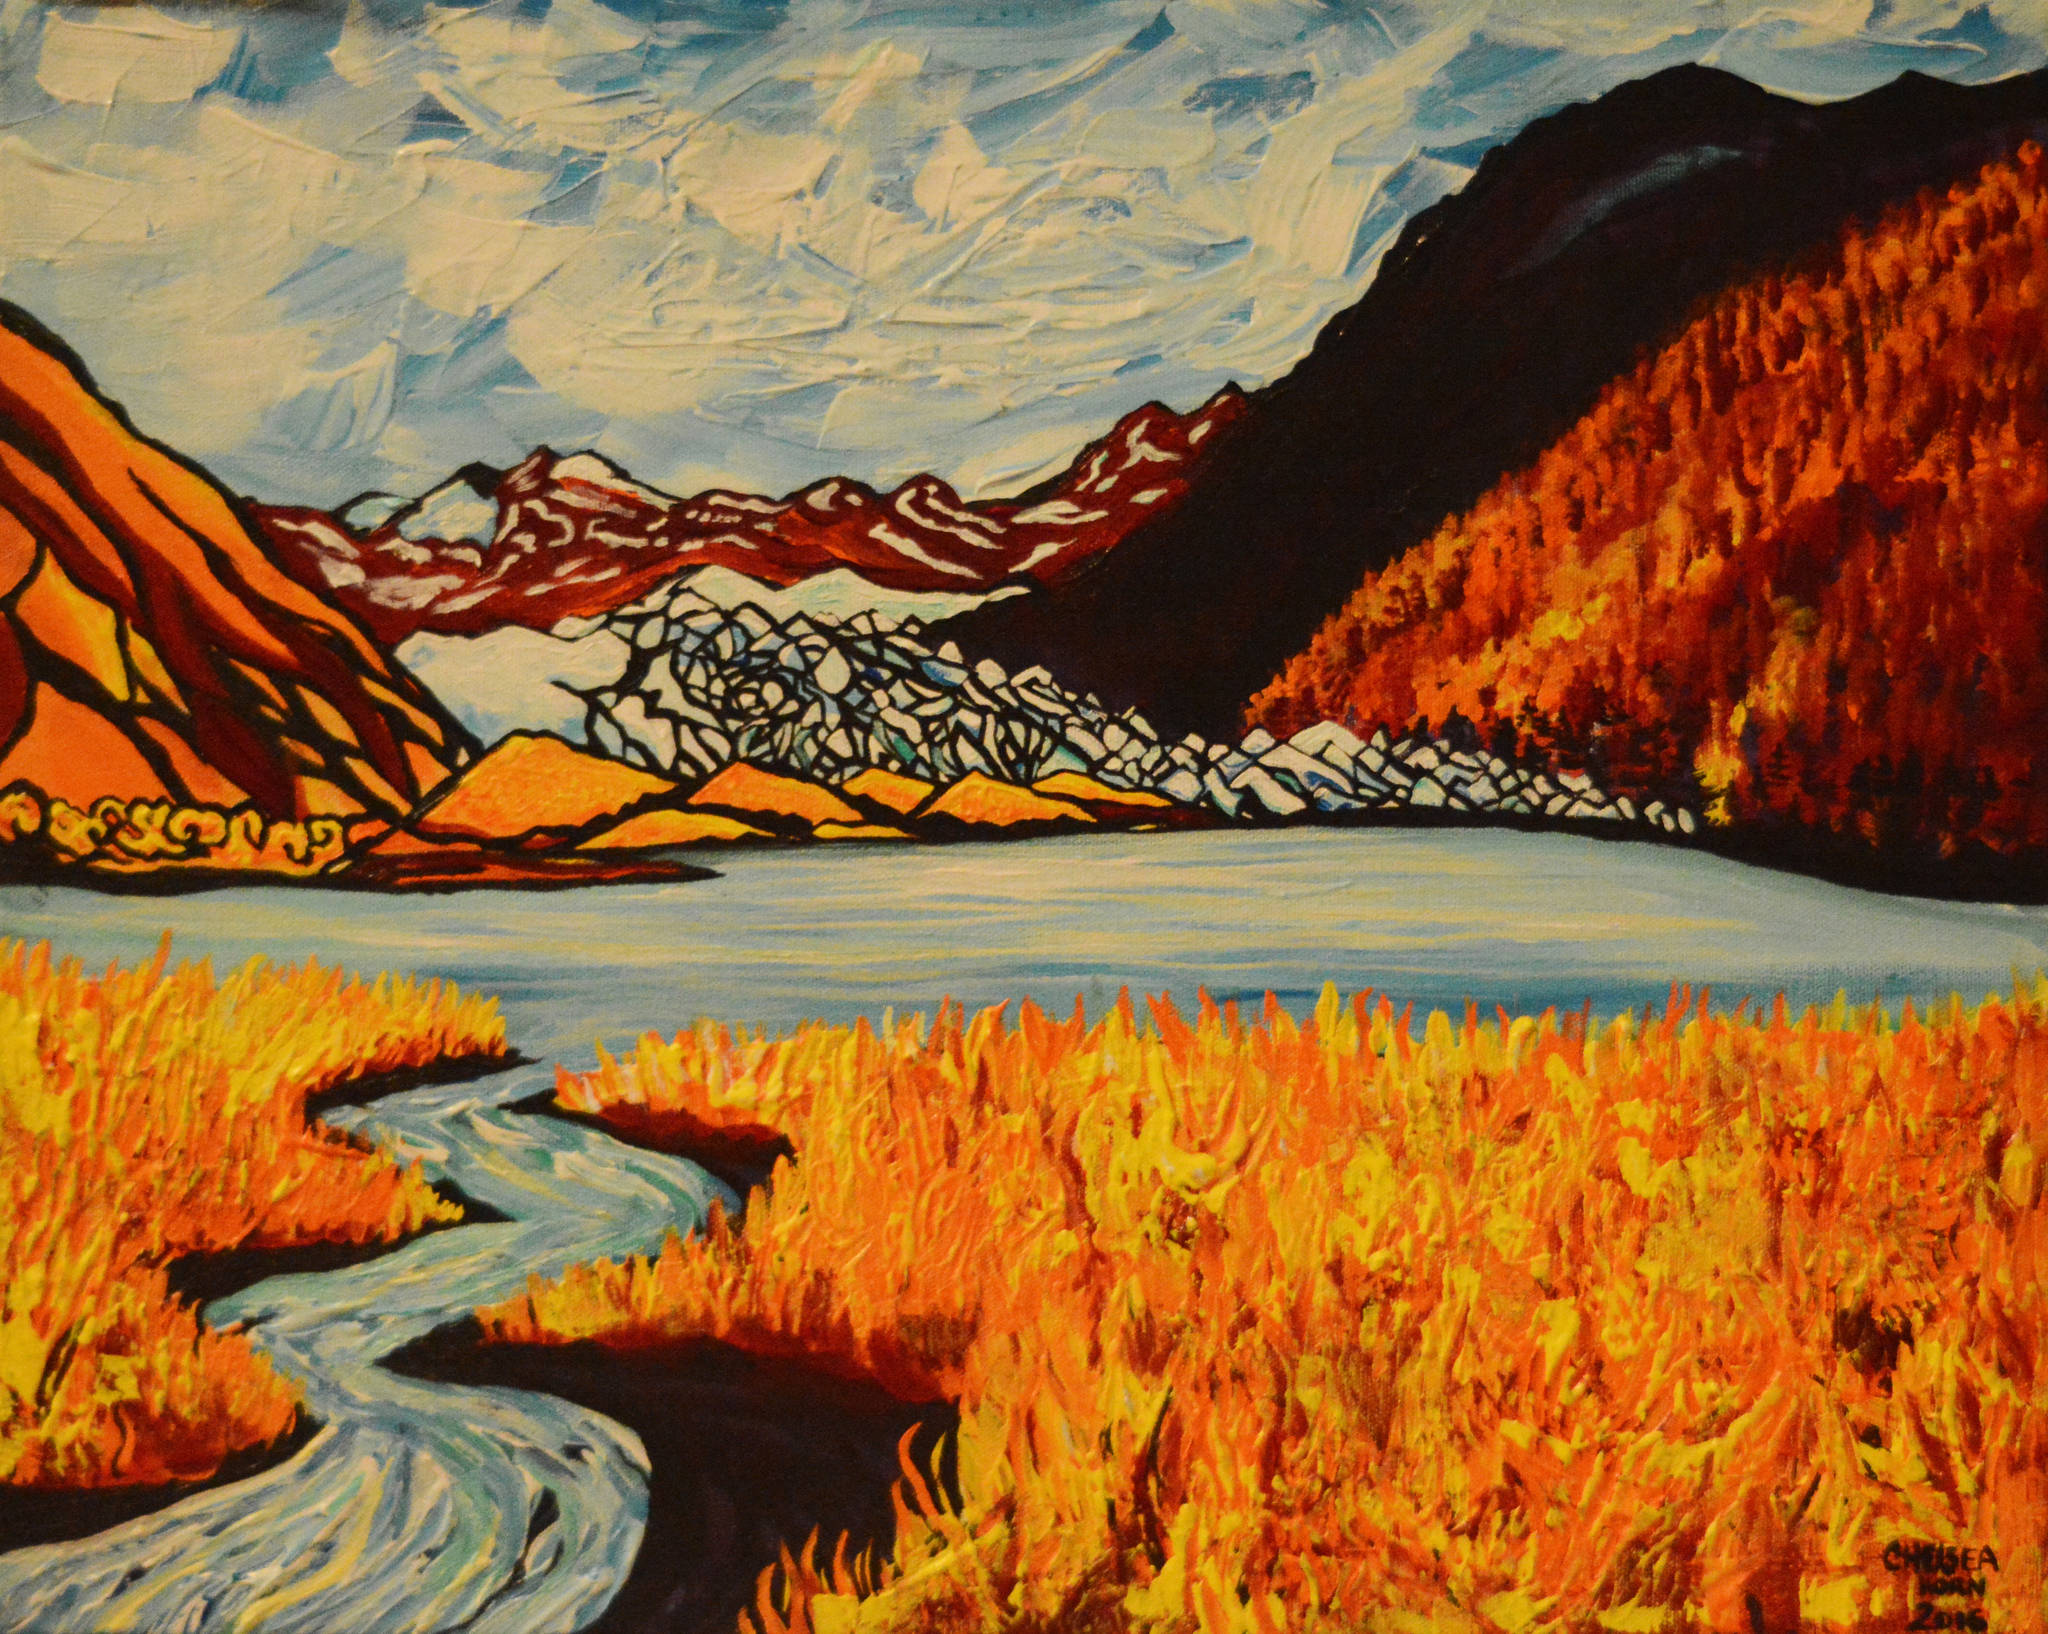 New Homer artist has first solo gallery show at Fireweed